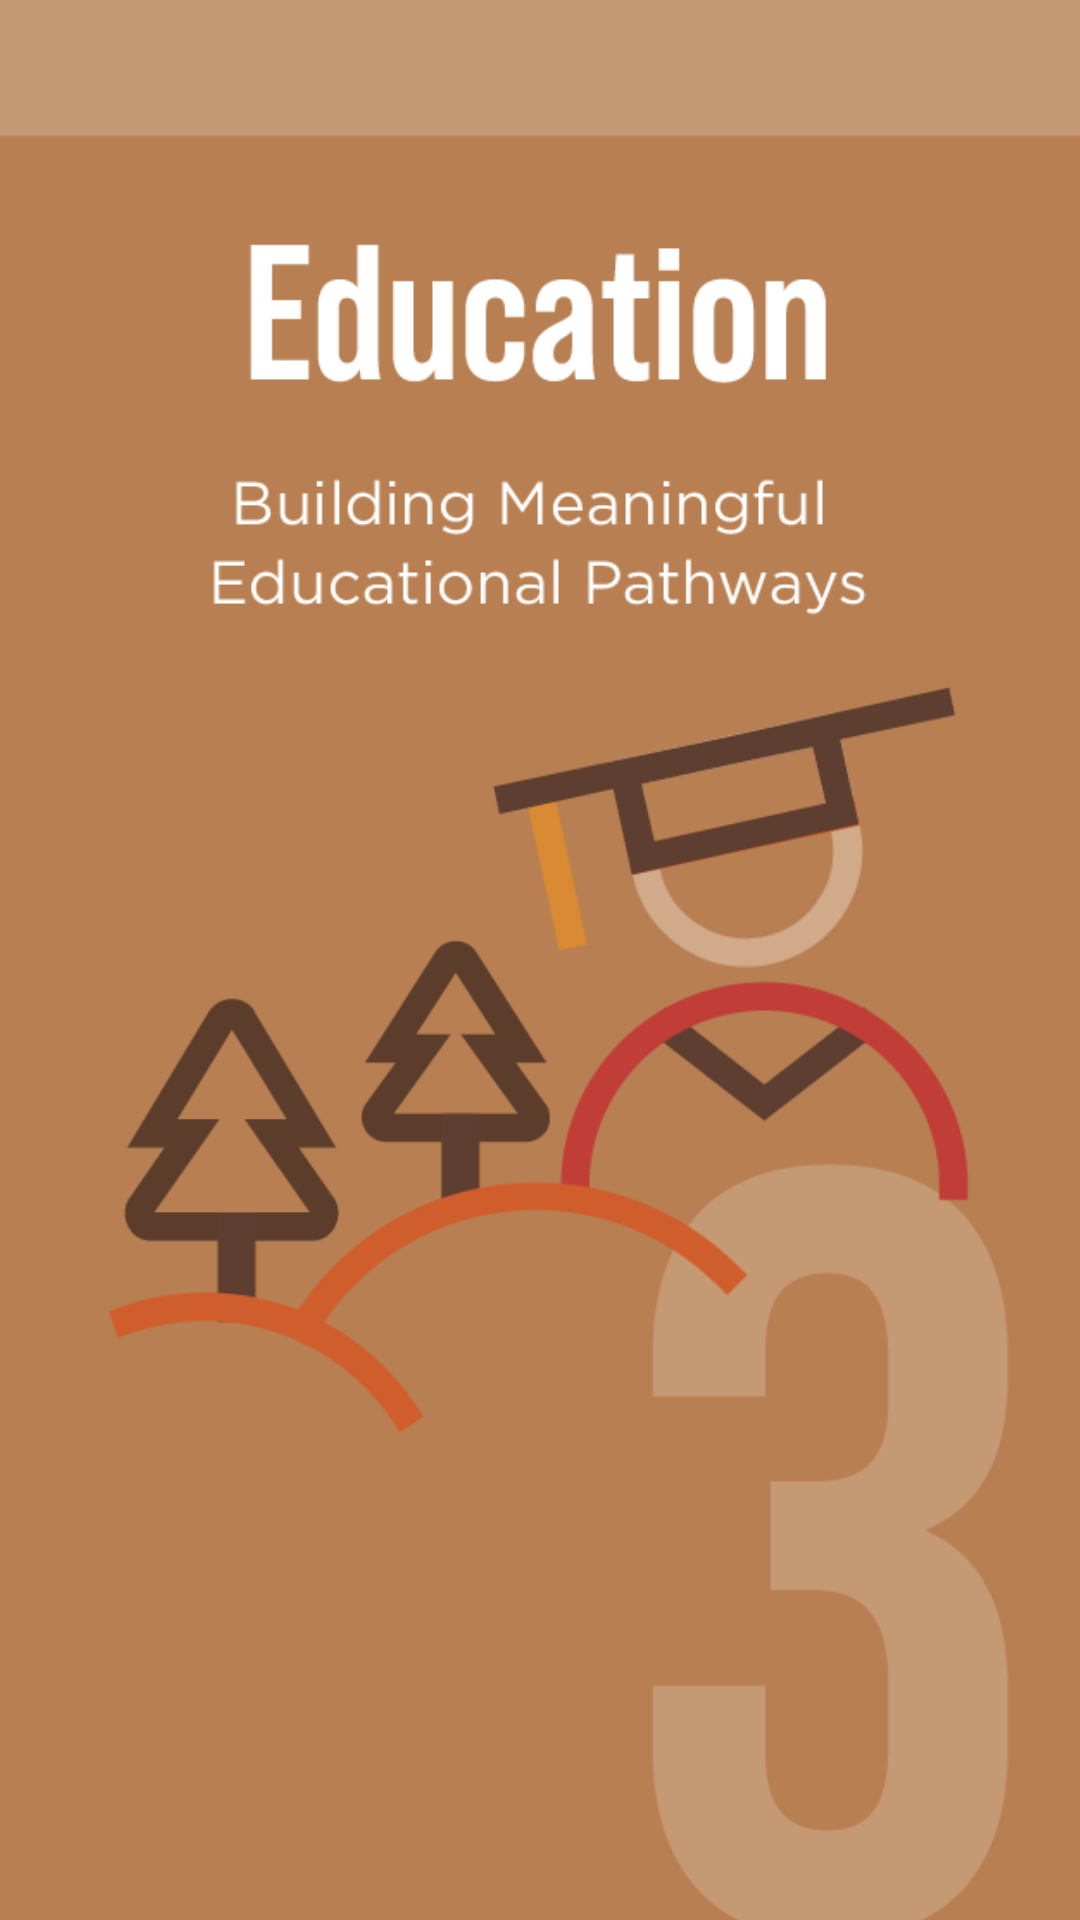 Education - building meaningful educational pathways